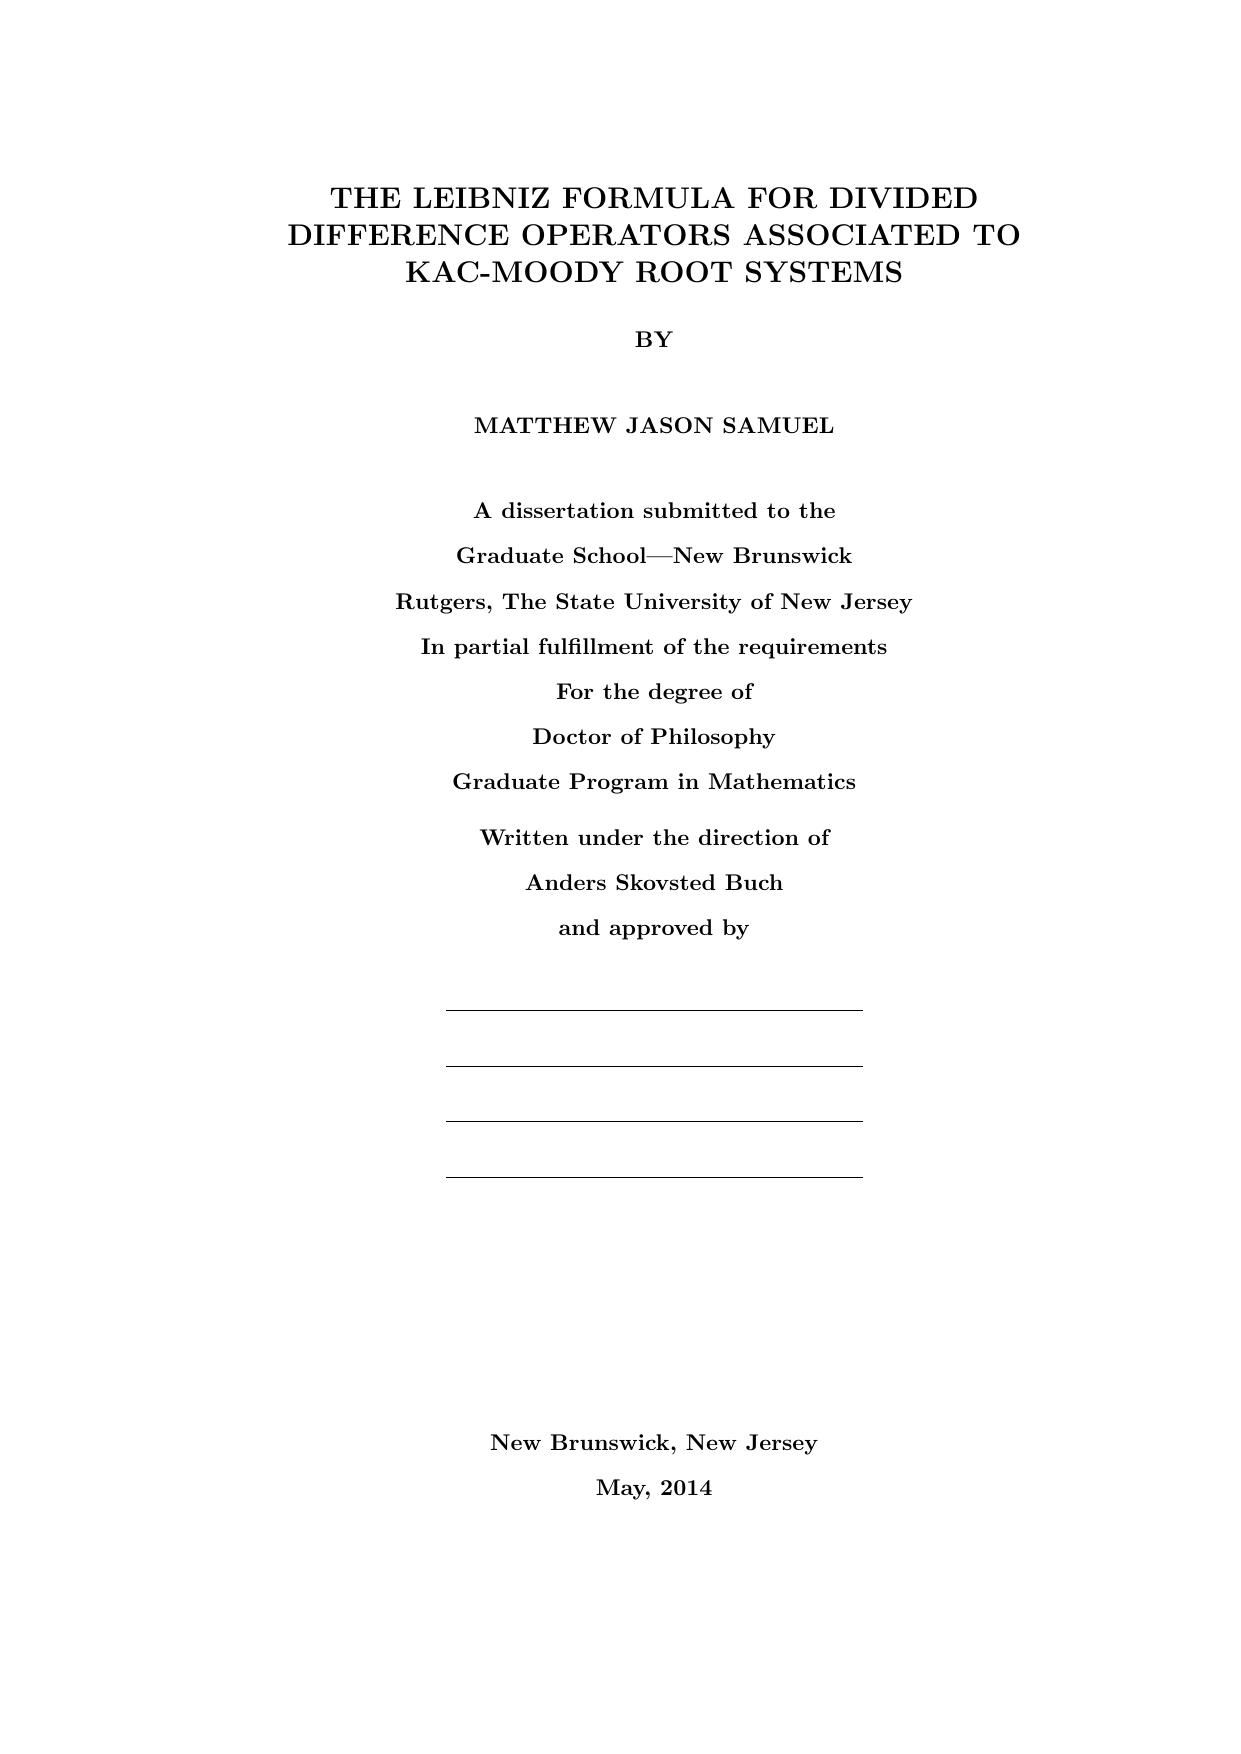 The Leibniz formula for divided difference operators associated to Kac-Moody root systems - Thesis